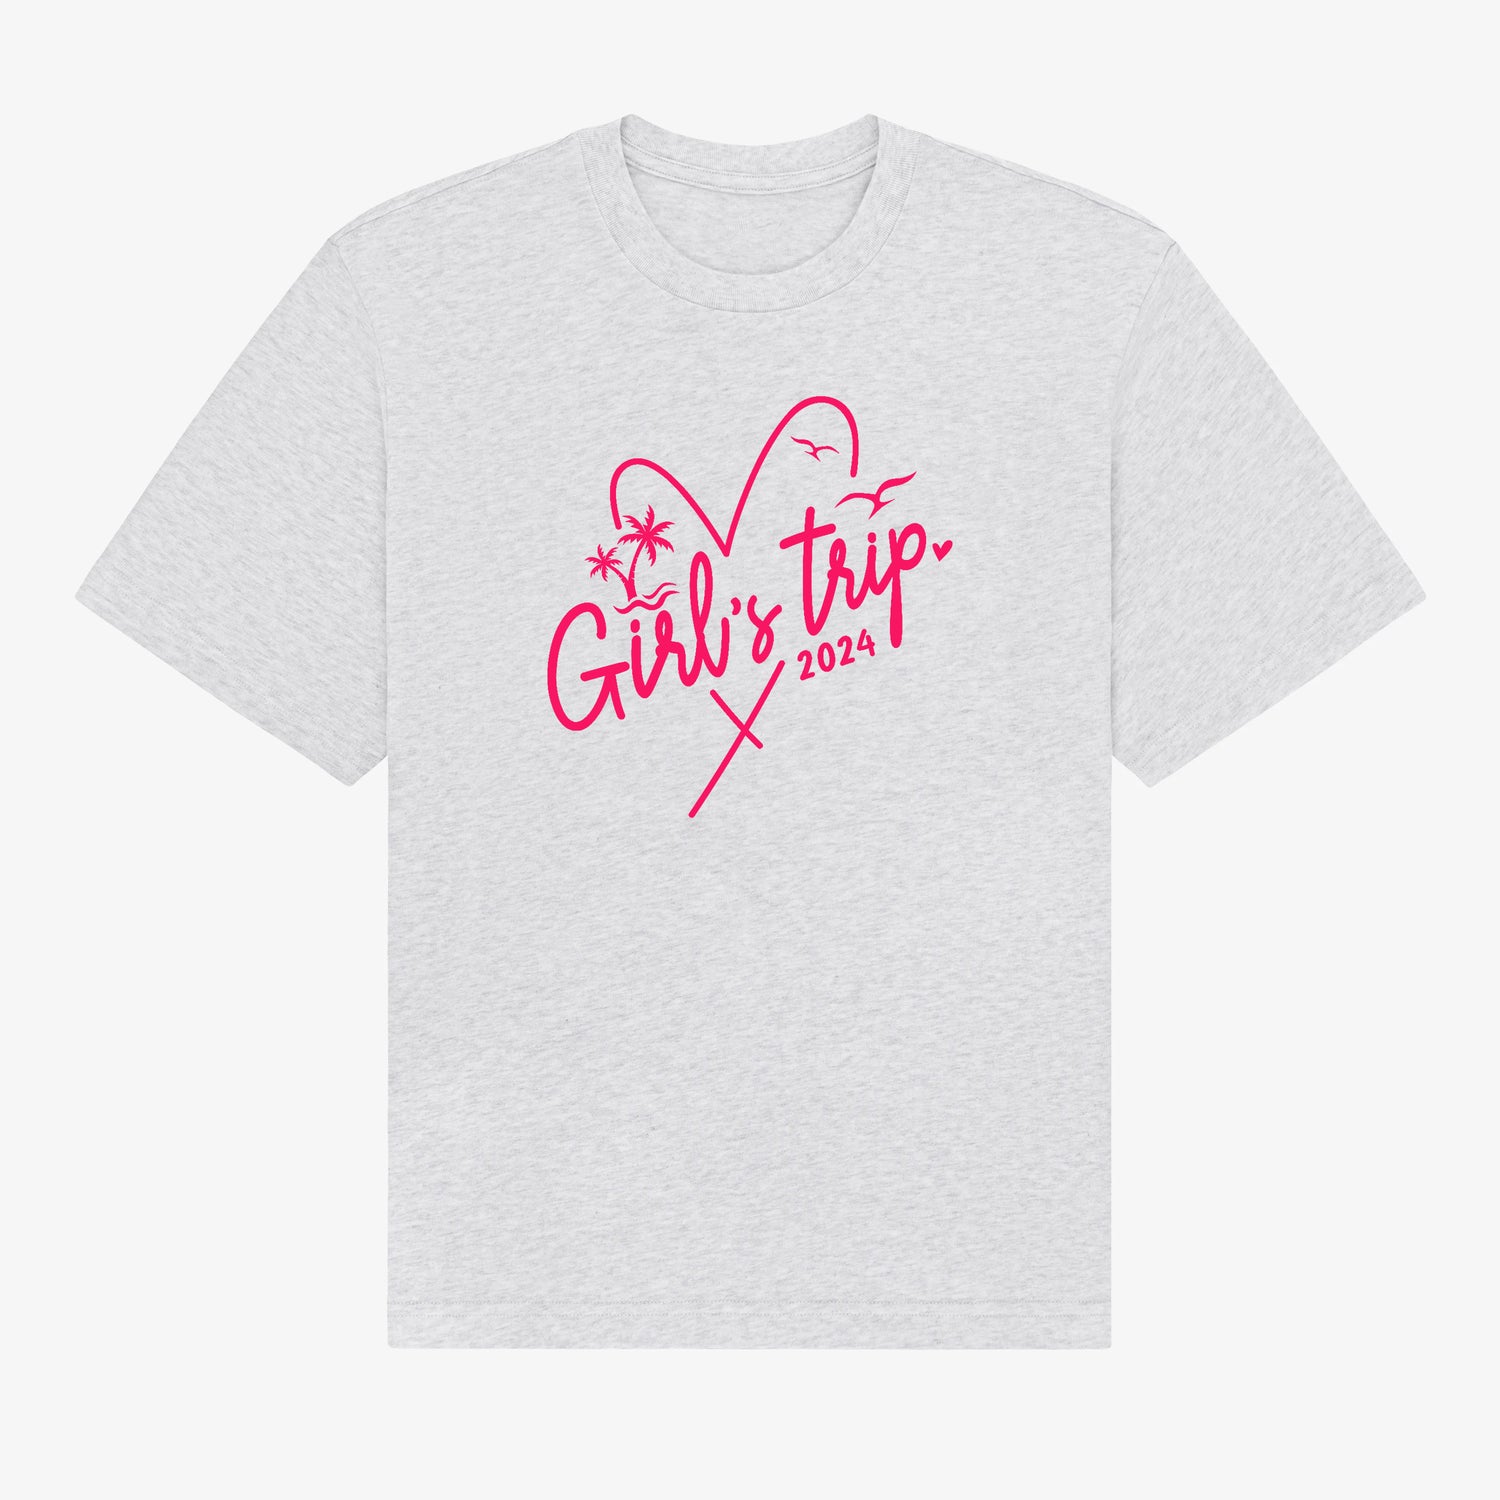 Custom Girls Trip 2024 shirts displayed with vibrant vacation scenes, each uniquely designed to capture the essence of adventure. Personalization option available, allowing customers to add their name to the front. Perfect addition to any vacation wardrobe. Made in Canada, 100% Cotton